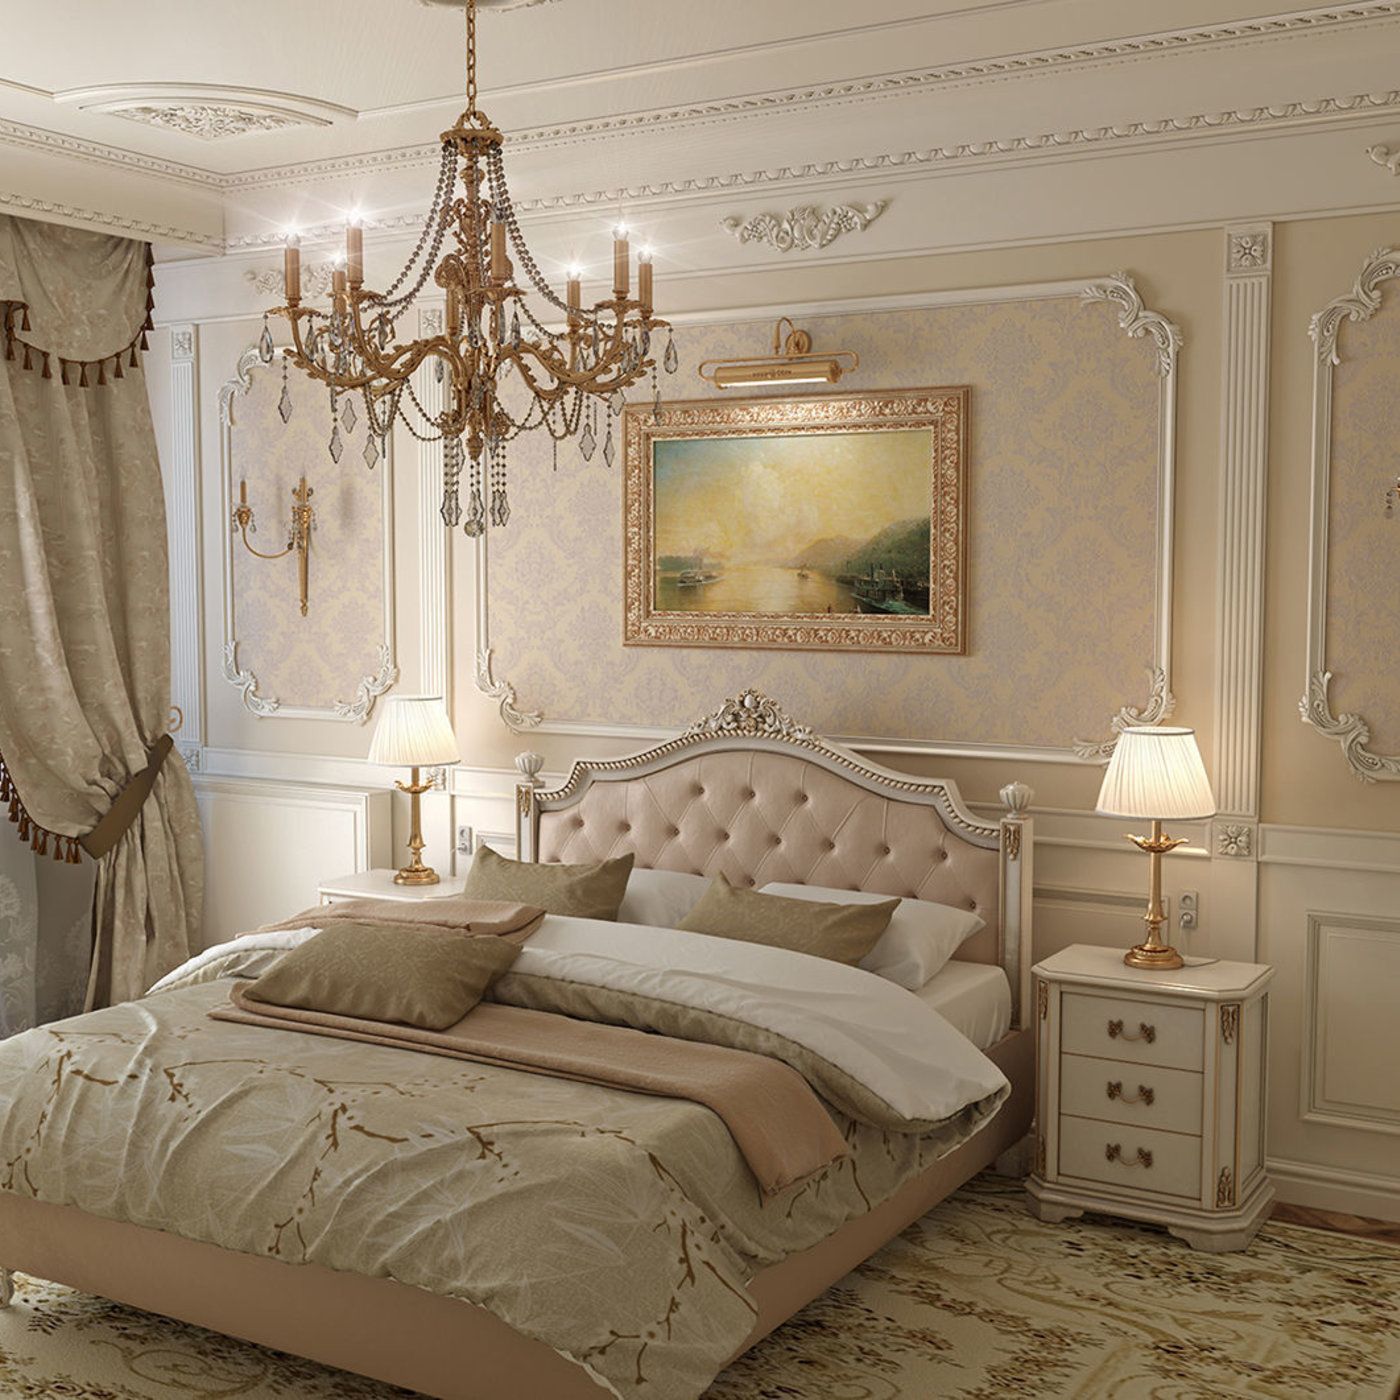 Give a Different Look with French bedroom furniture